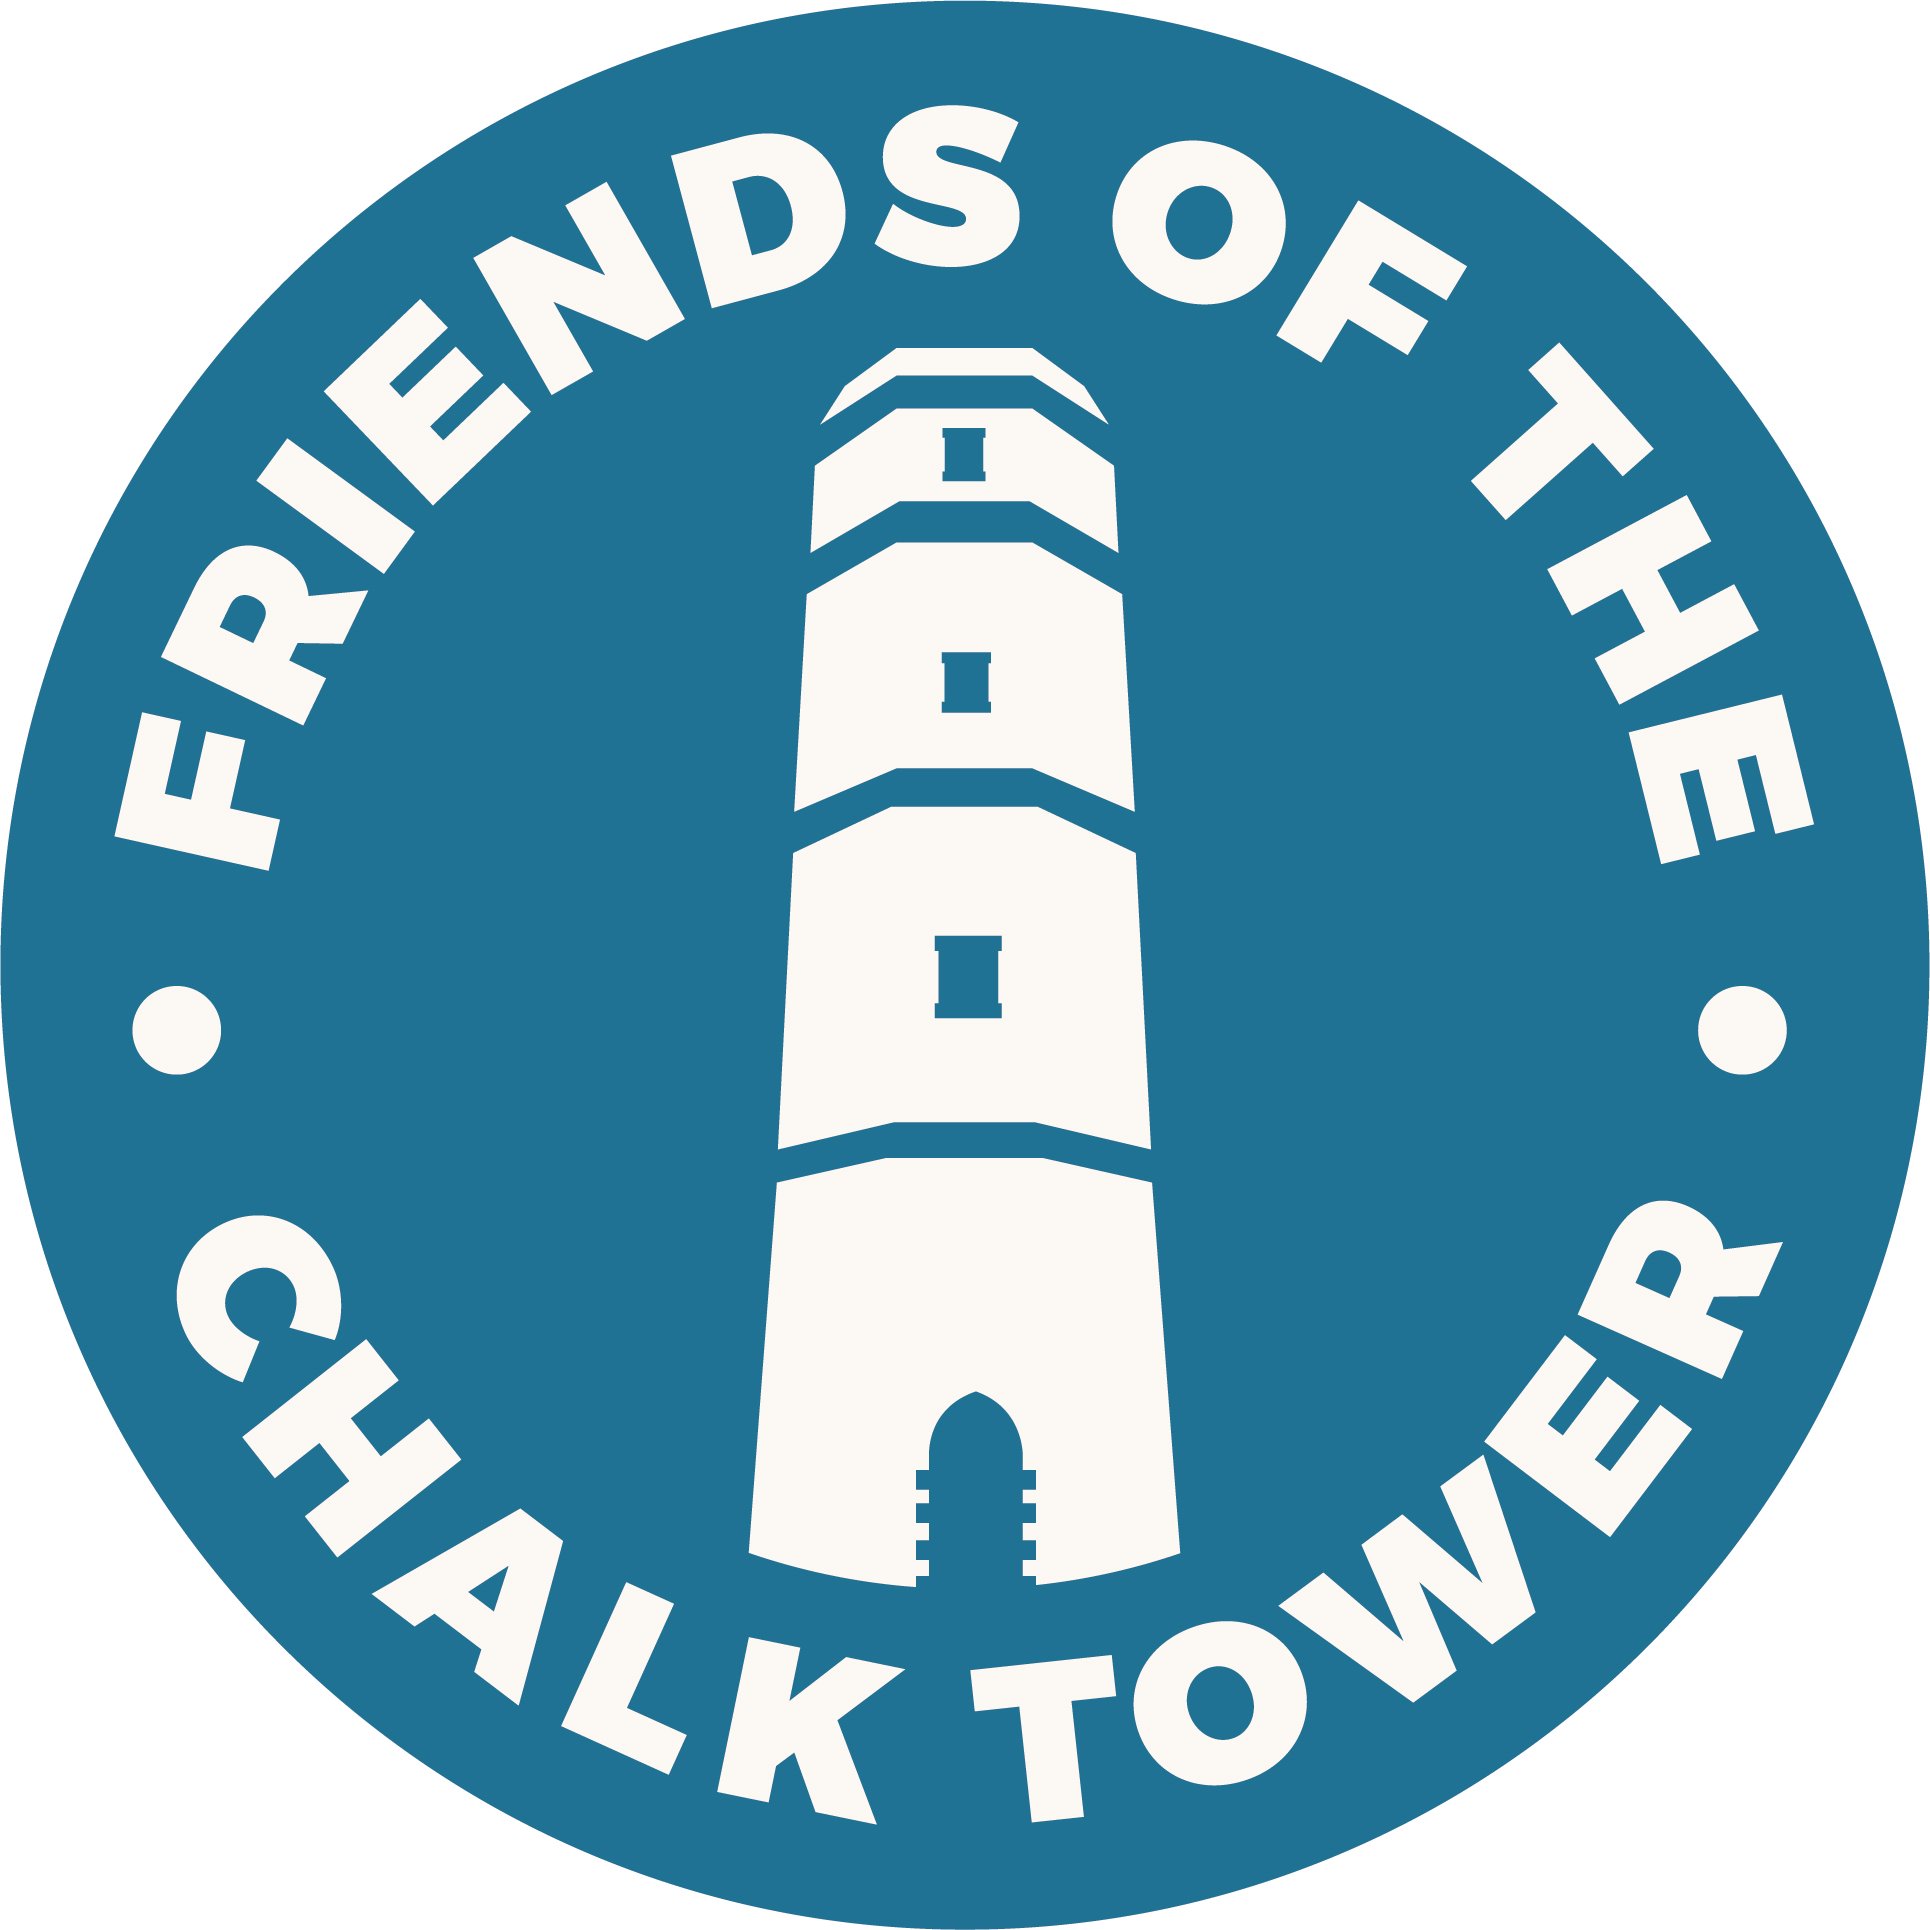 Image name Friends of the Chalk Tower Logo CMYK CLR JUN22 the 13 image from the post Friends of the Chalk Tower Quiz night in Yorkshire.com.